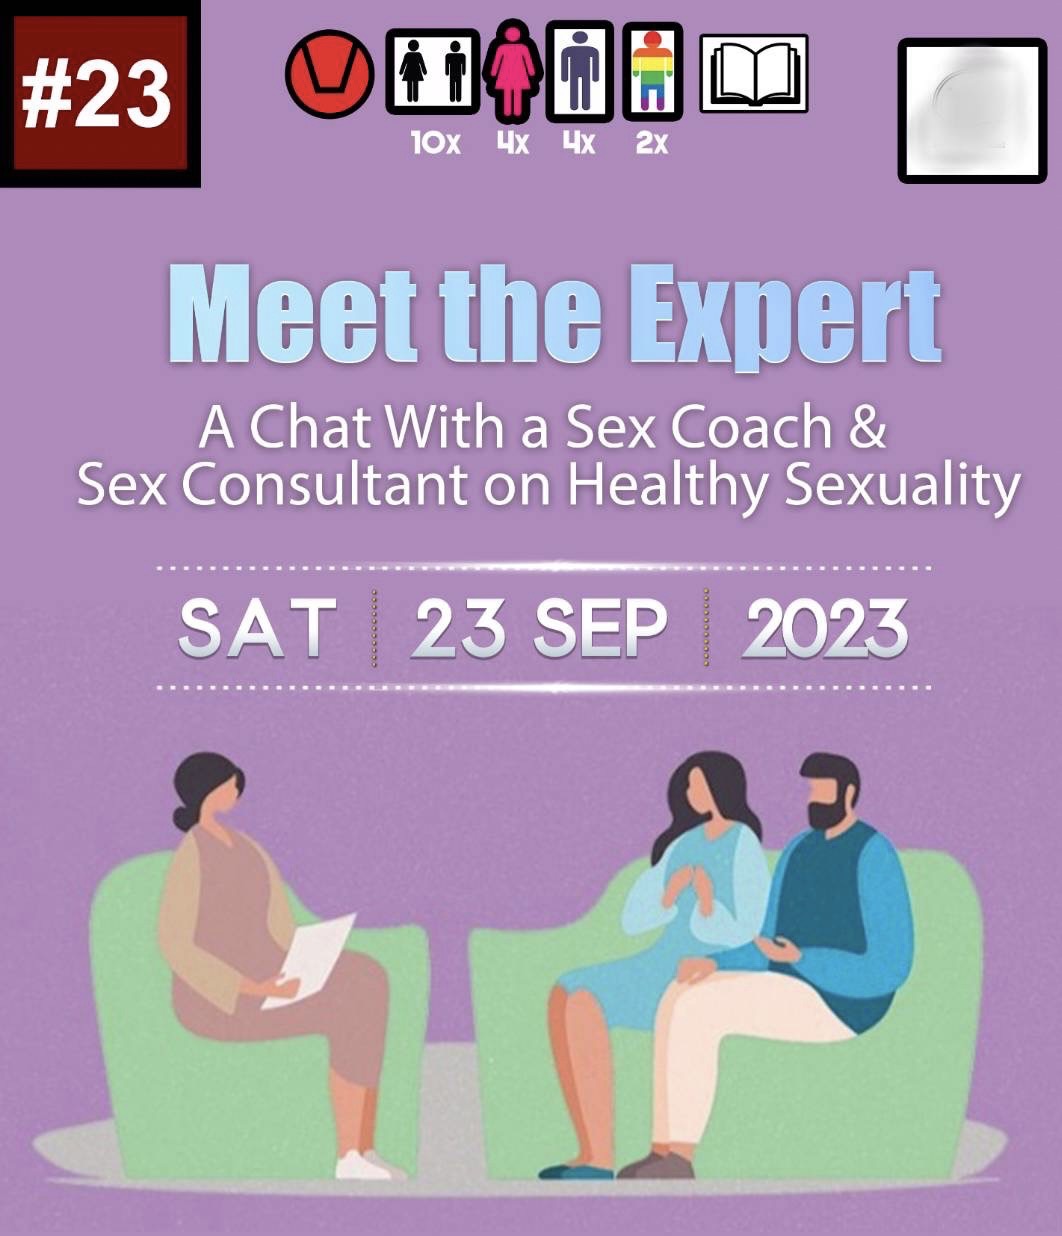 A Chat on Healthy Sexuality